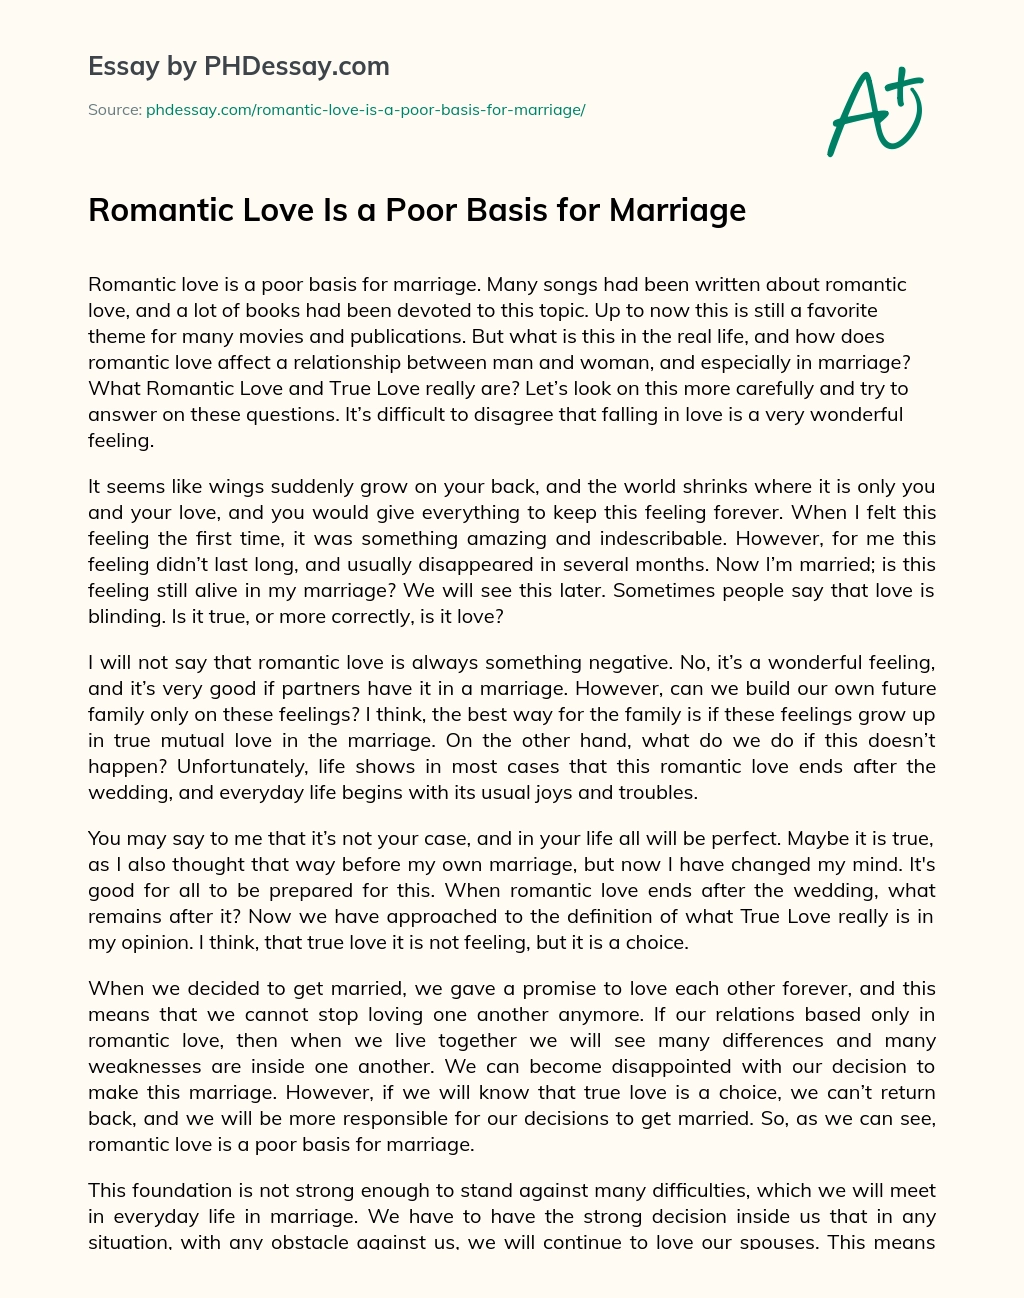 Romantic Love Is a Poor Basis for Marriage essay